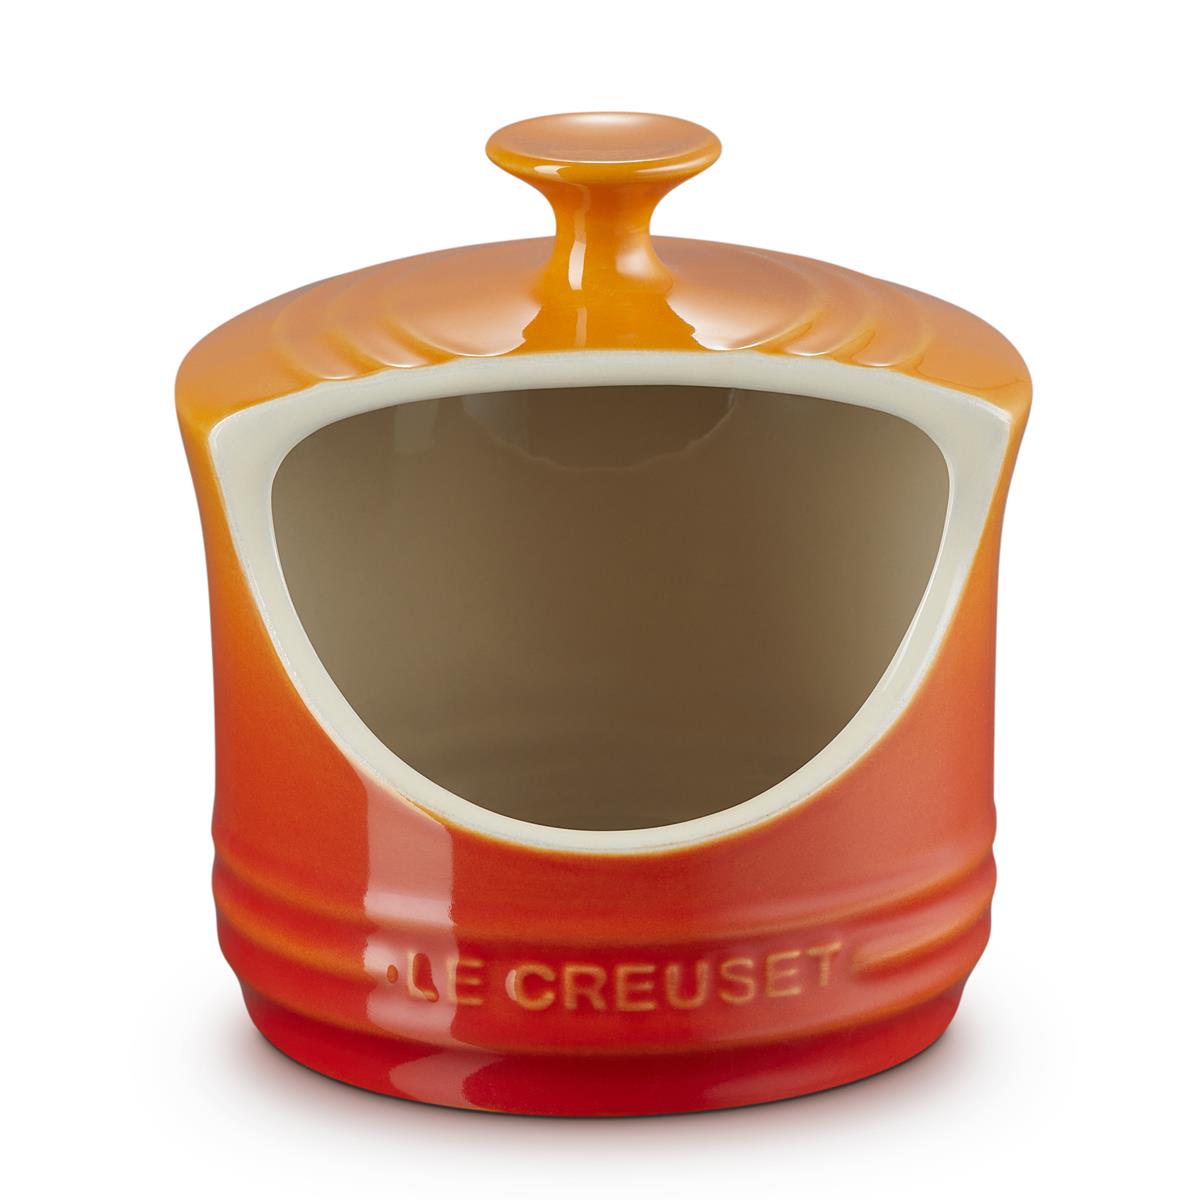 What is the MPN for the le creuset salt pig?